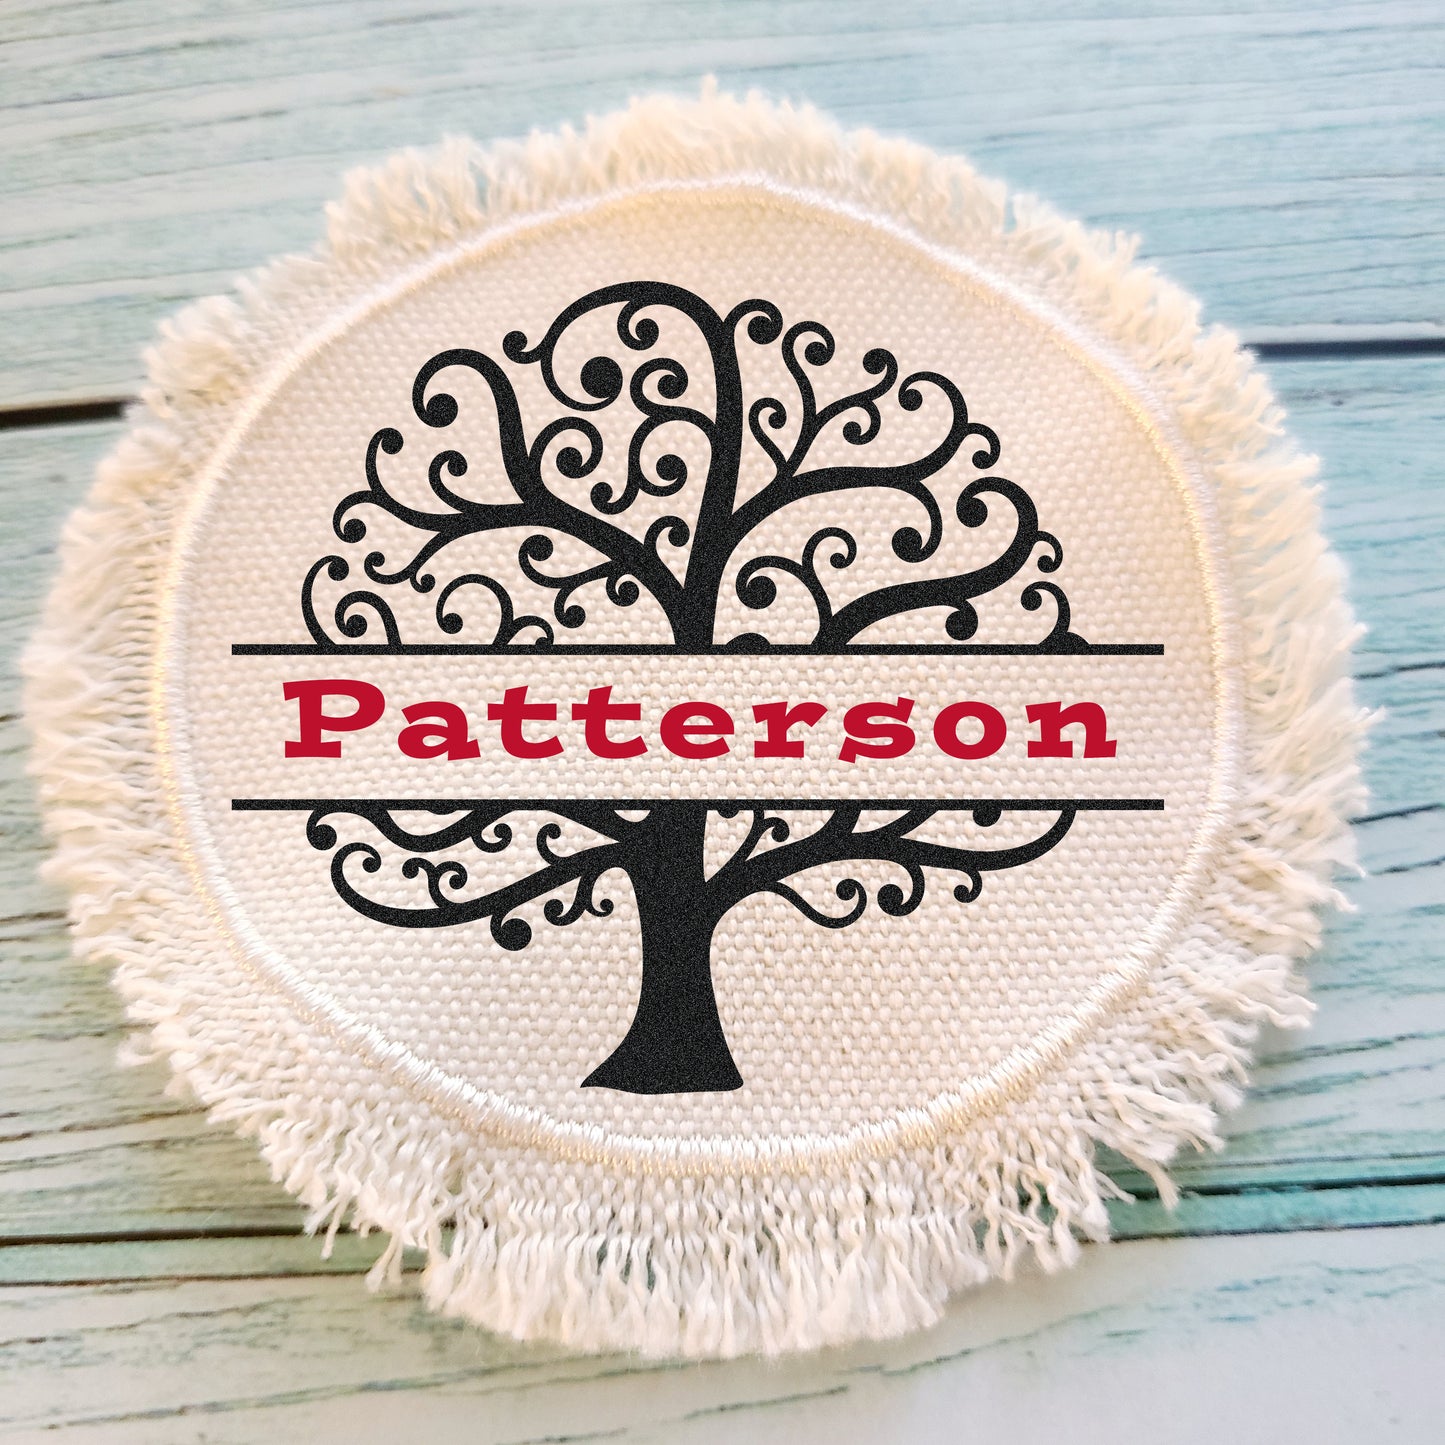 10 pcs! Round Raggy Distressed Burlap Center Stitched Hat Patch Sublimation Blank with Glue Paper